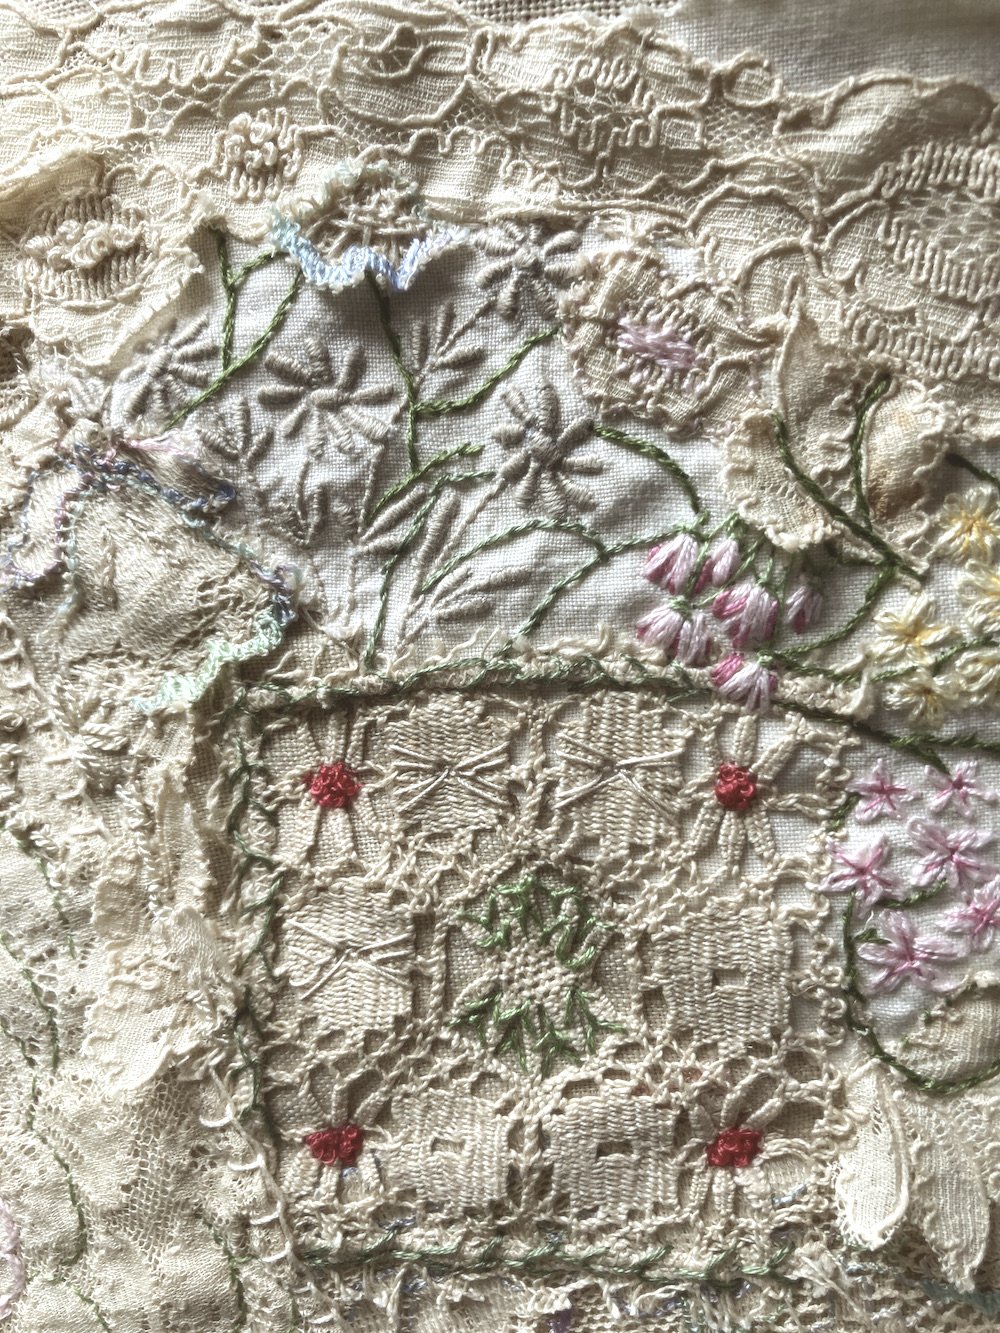 Vintage Linen and Lace - Slow Stitch - Hand Embroidery